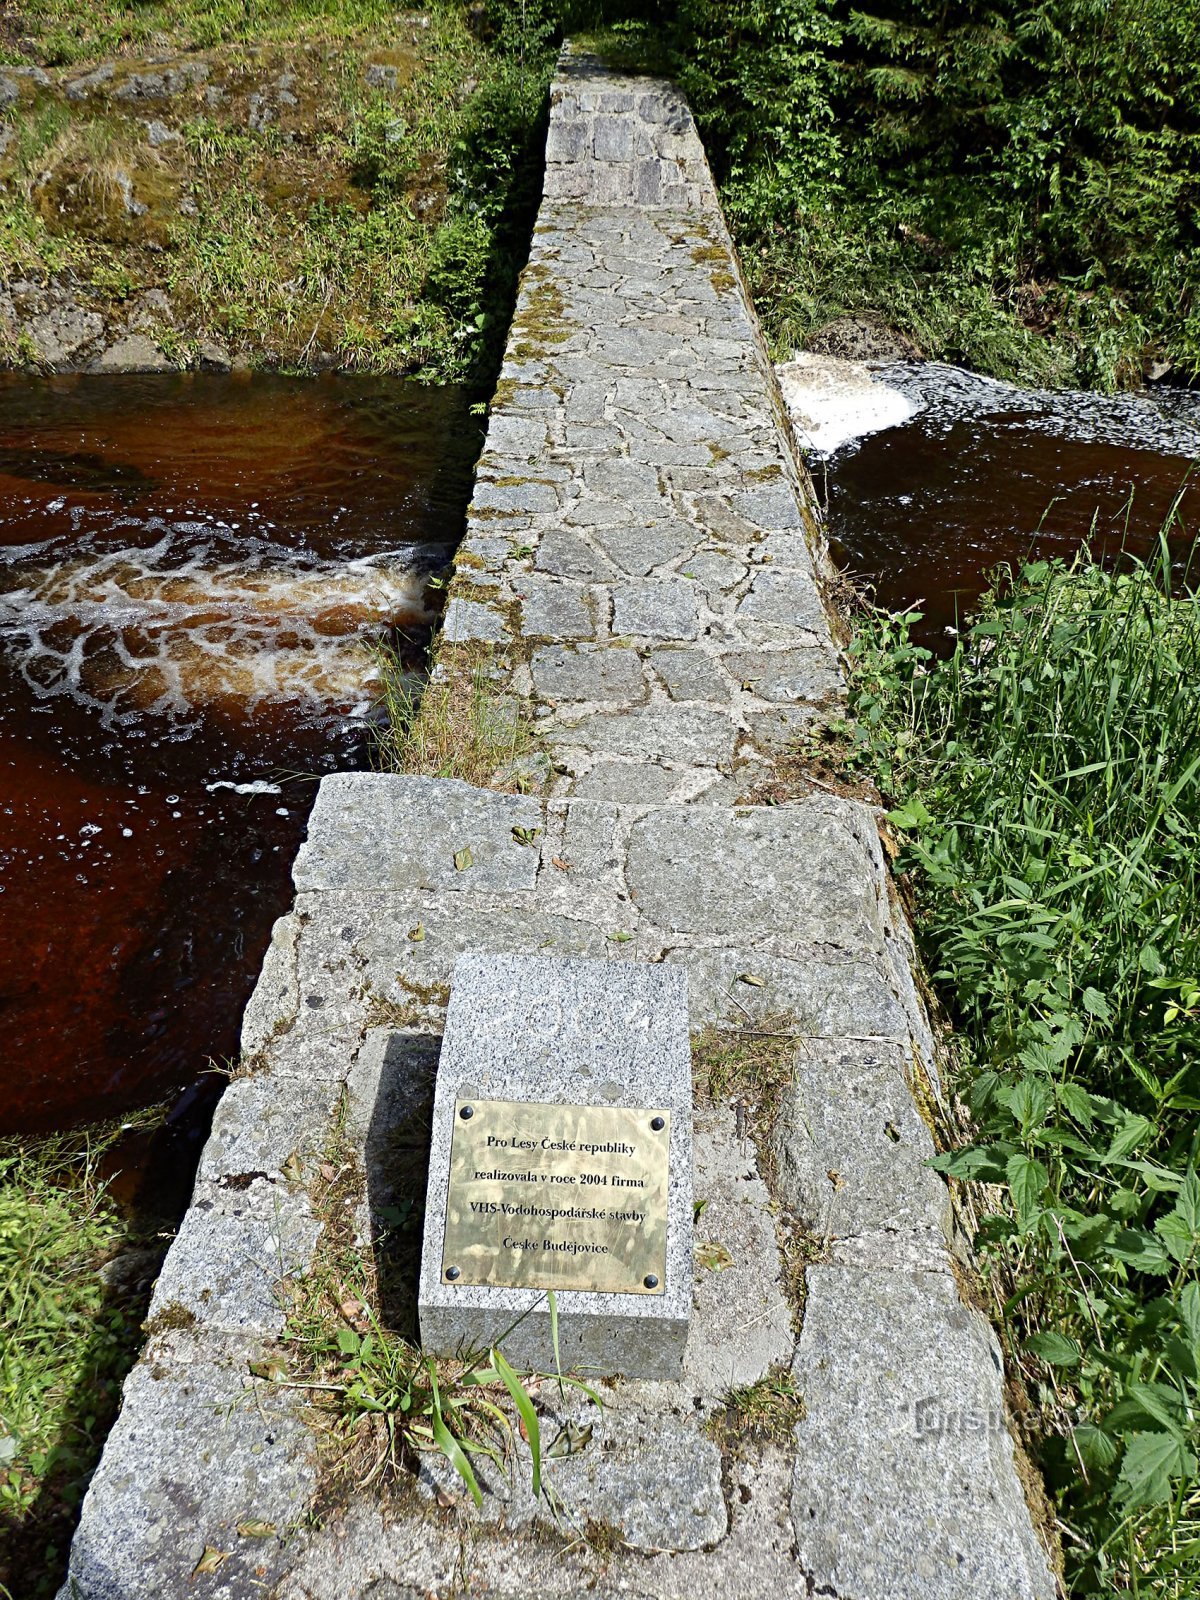 damming of rapids Huťský potok - a spillway is a transverse object with an overflow edge above